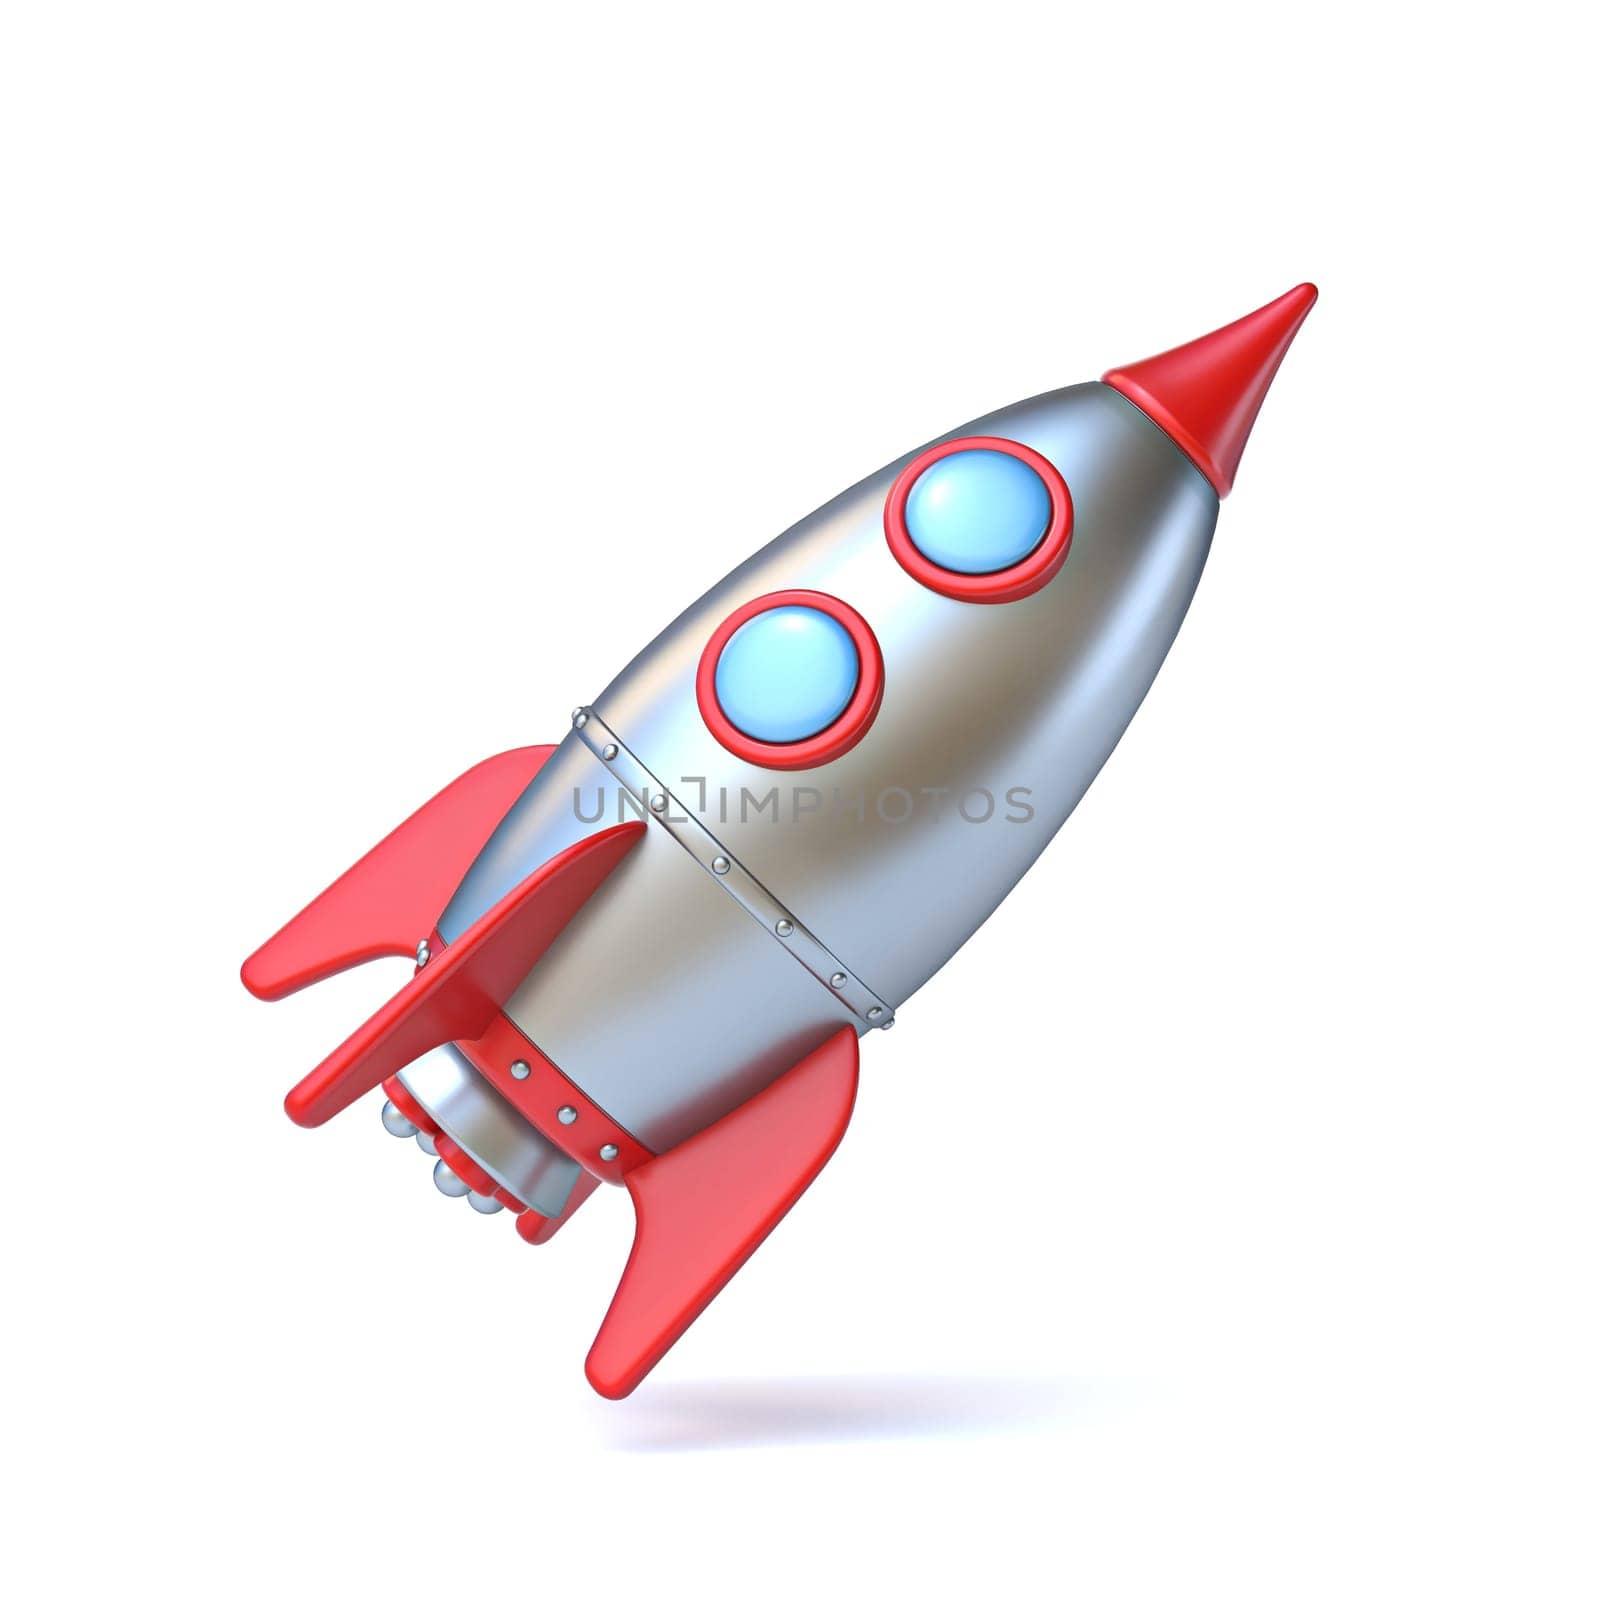 Space rocket toy Side view 3D rendering illustration isolated on white background